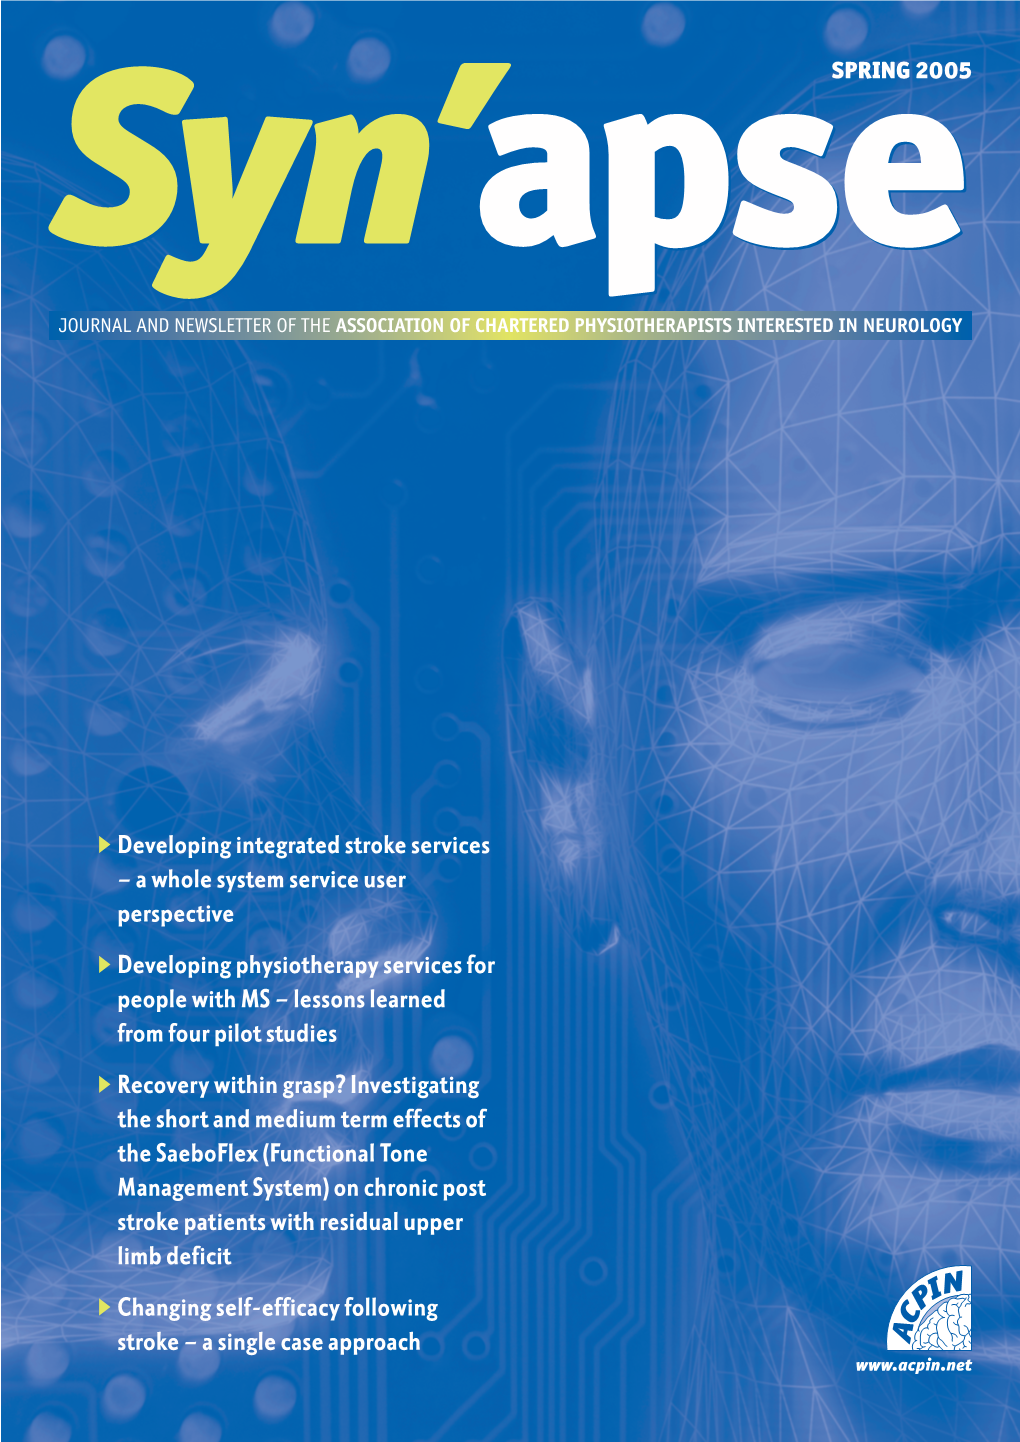 Spring 2005 Journal and Newsletter of the Association of Chartered Physiotherapists Interested in Neurology